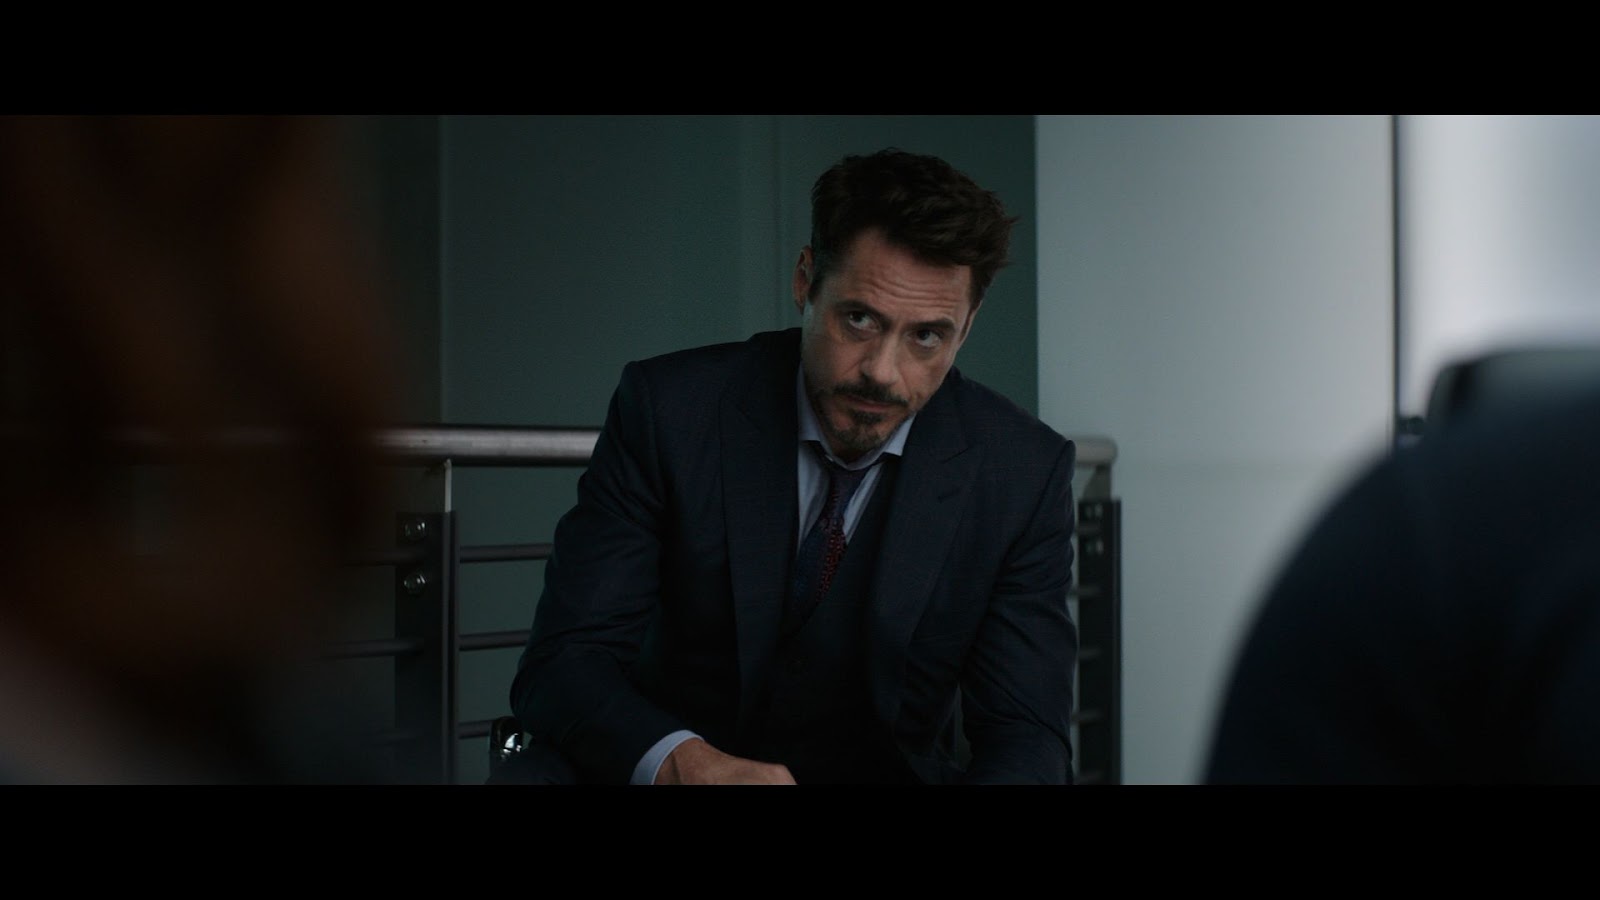 Captain America: Civil War -- Are Tony Stark's suits actually from Tom Ford?